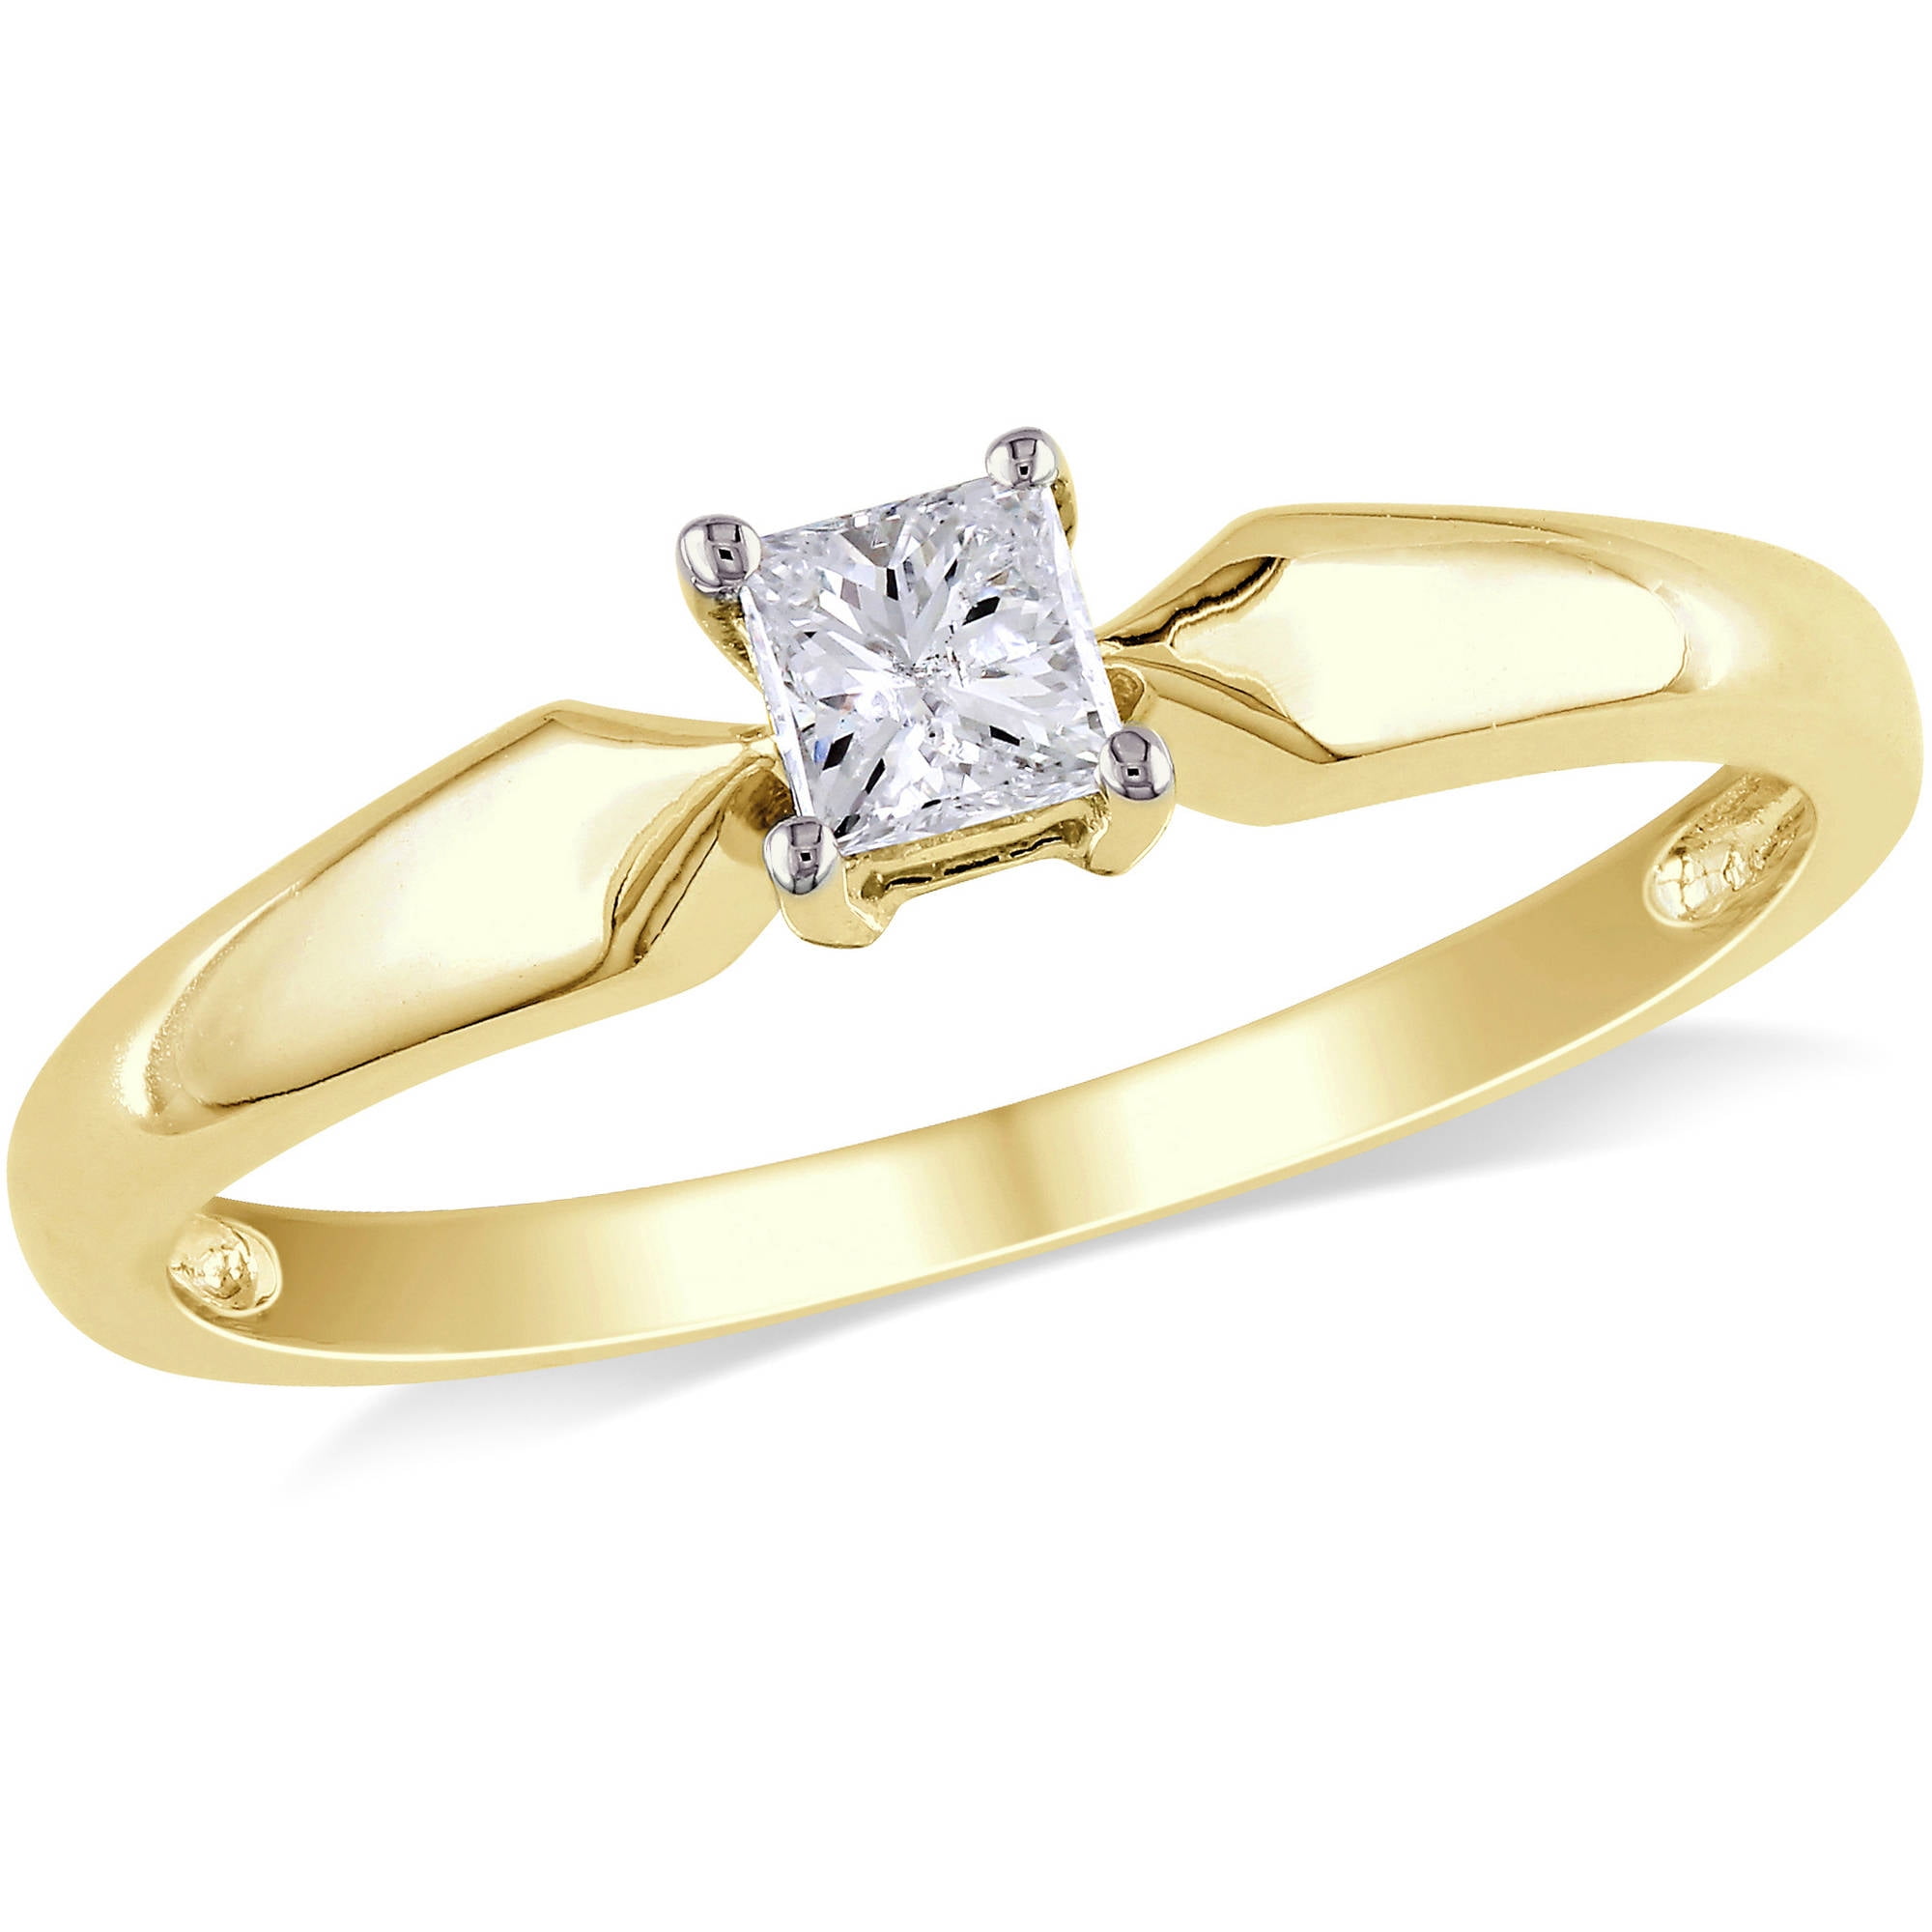 1/4 Carat T.W. Princess Cut Diamond Solitaire Engagement Ring in 10kt ...